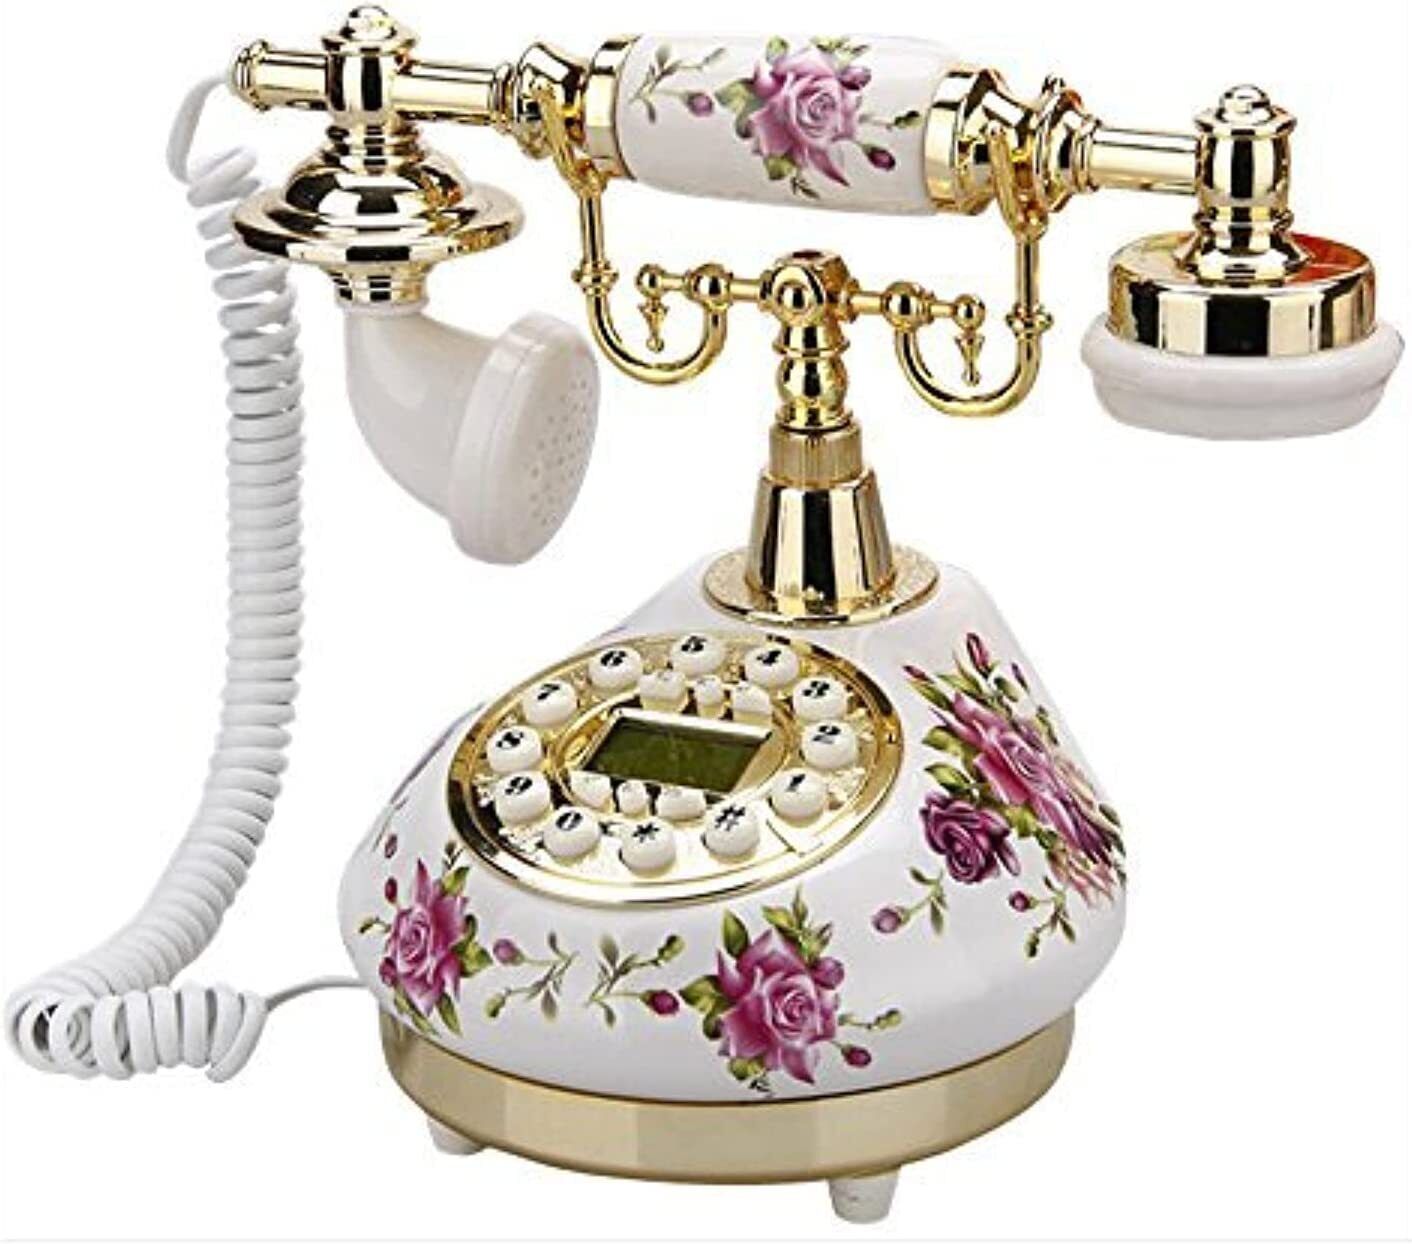 Retro Vintage Antique Telephone Old Fashioned Push Button dial Home Decor